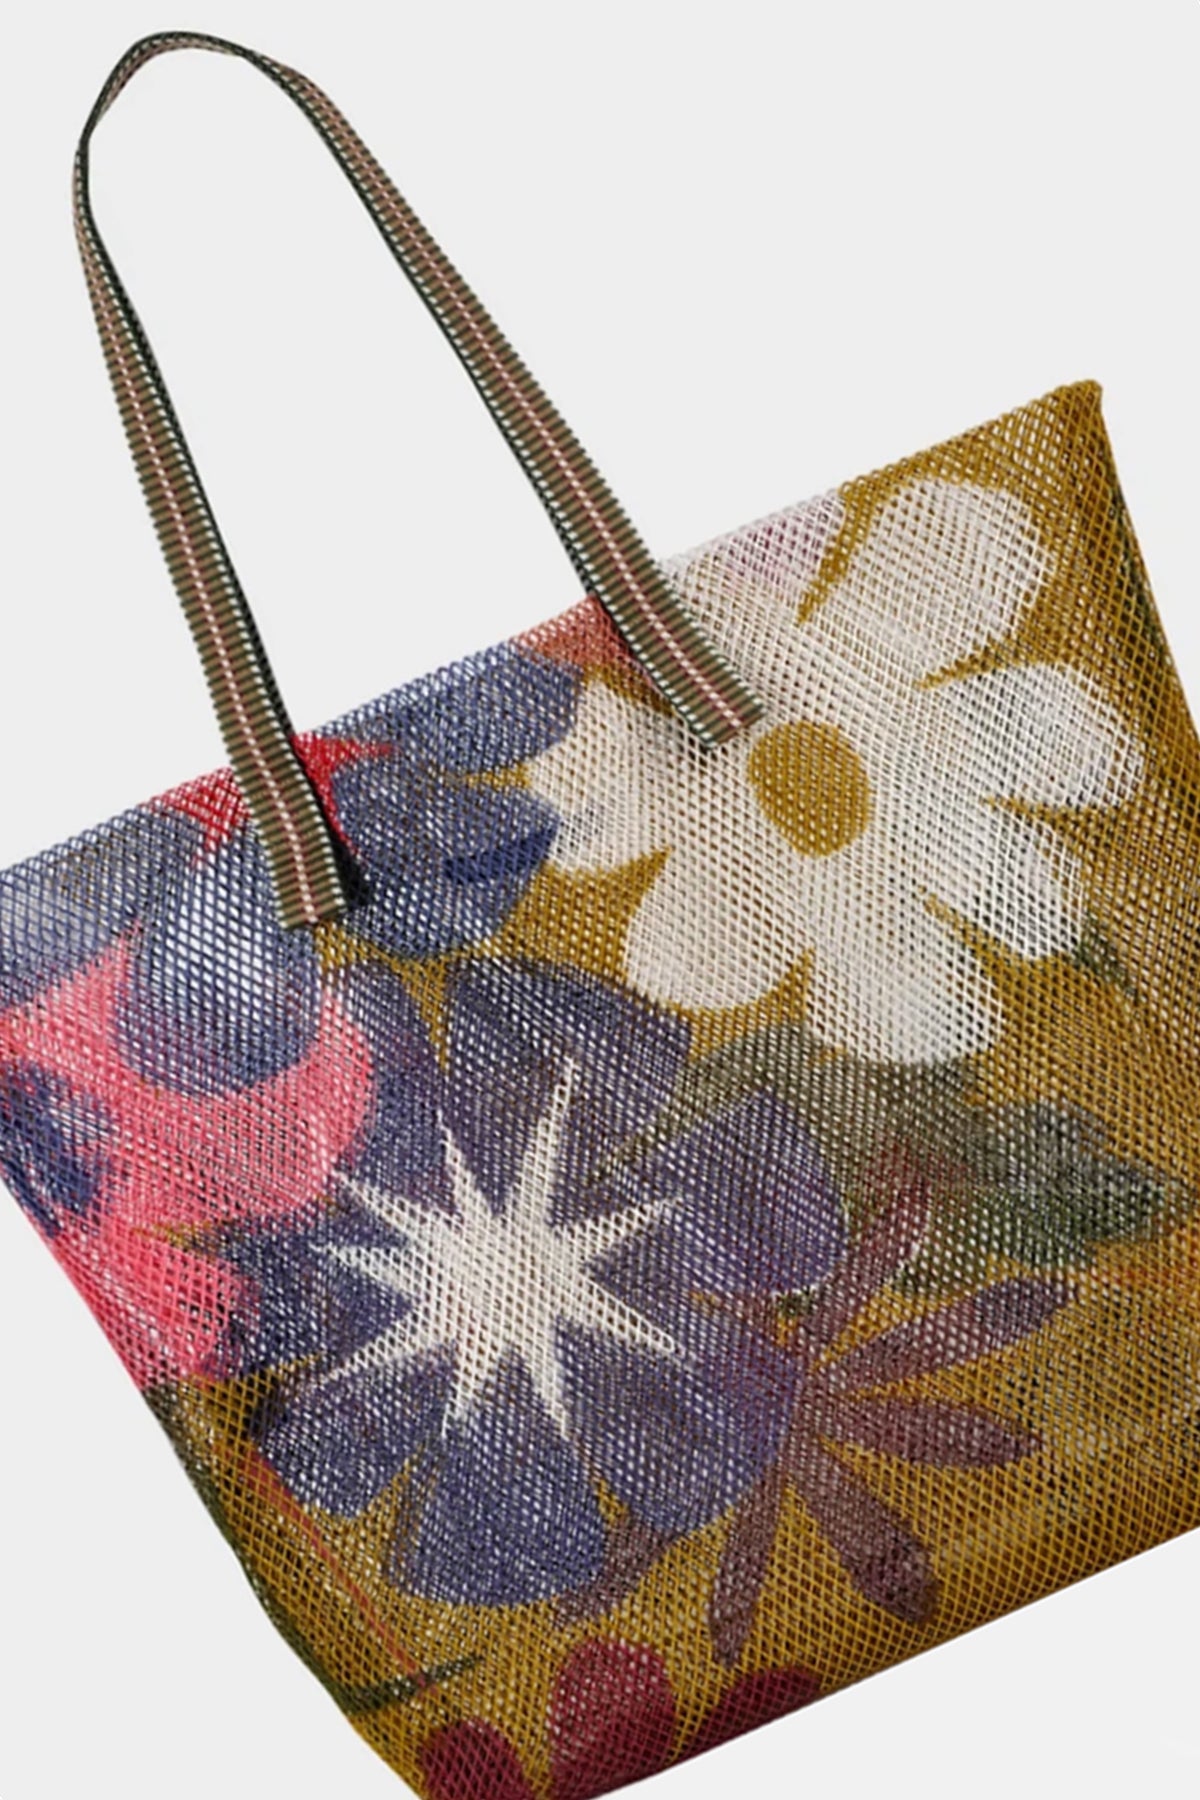 Small mesh tote with olive background, large multi colored flowers and striped fabric handle.-24555117707457